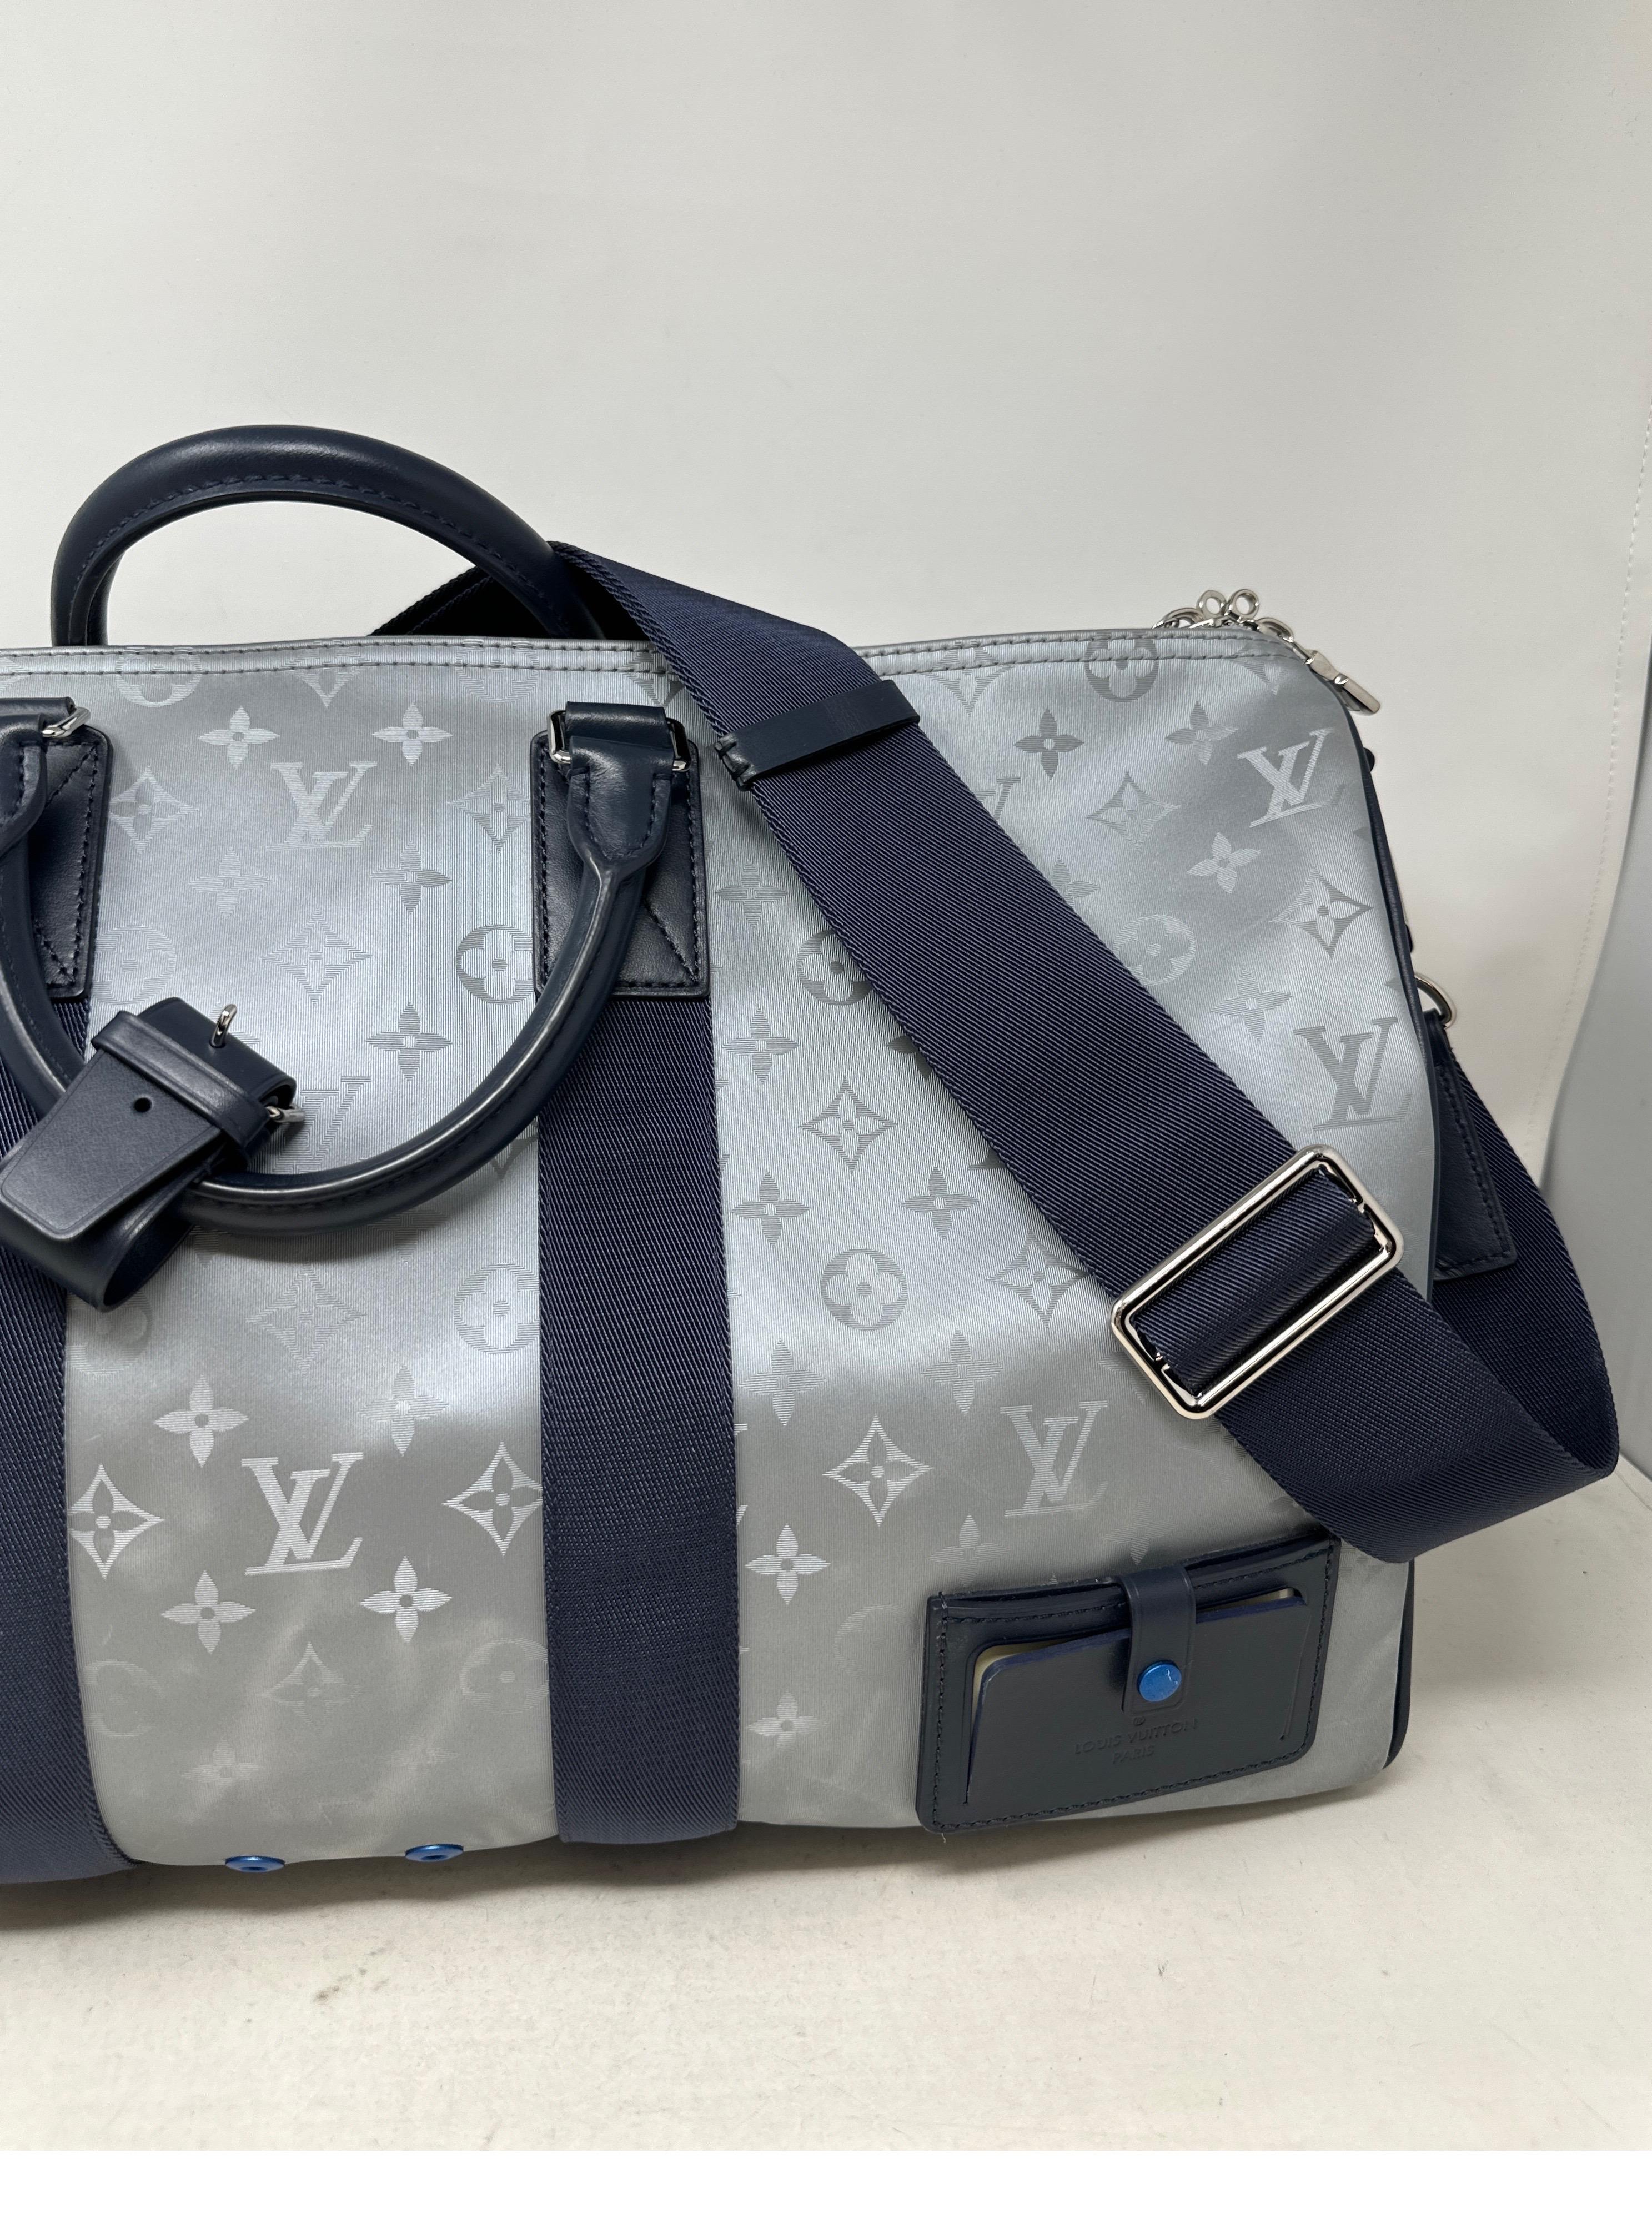 Louis Vuitton Silver Monogram Satellite 50 Keepall Bandouliere. Limited edition and rare collector's piece. Excellent condition. Interior clean. Unique silver grey coating over monogram. Navy leather handles and trim. Great carry on size for travel.